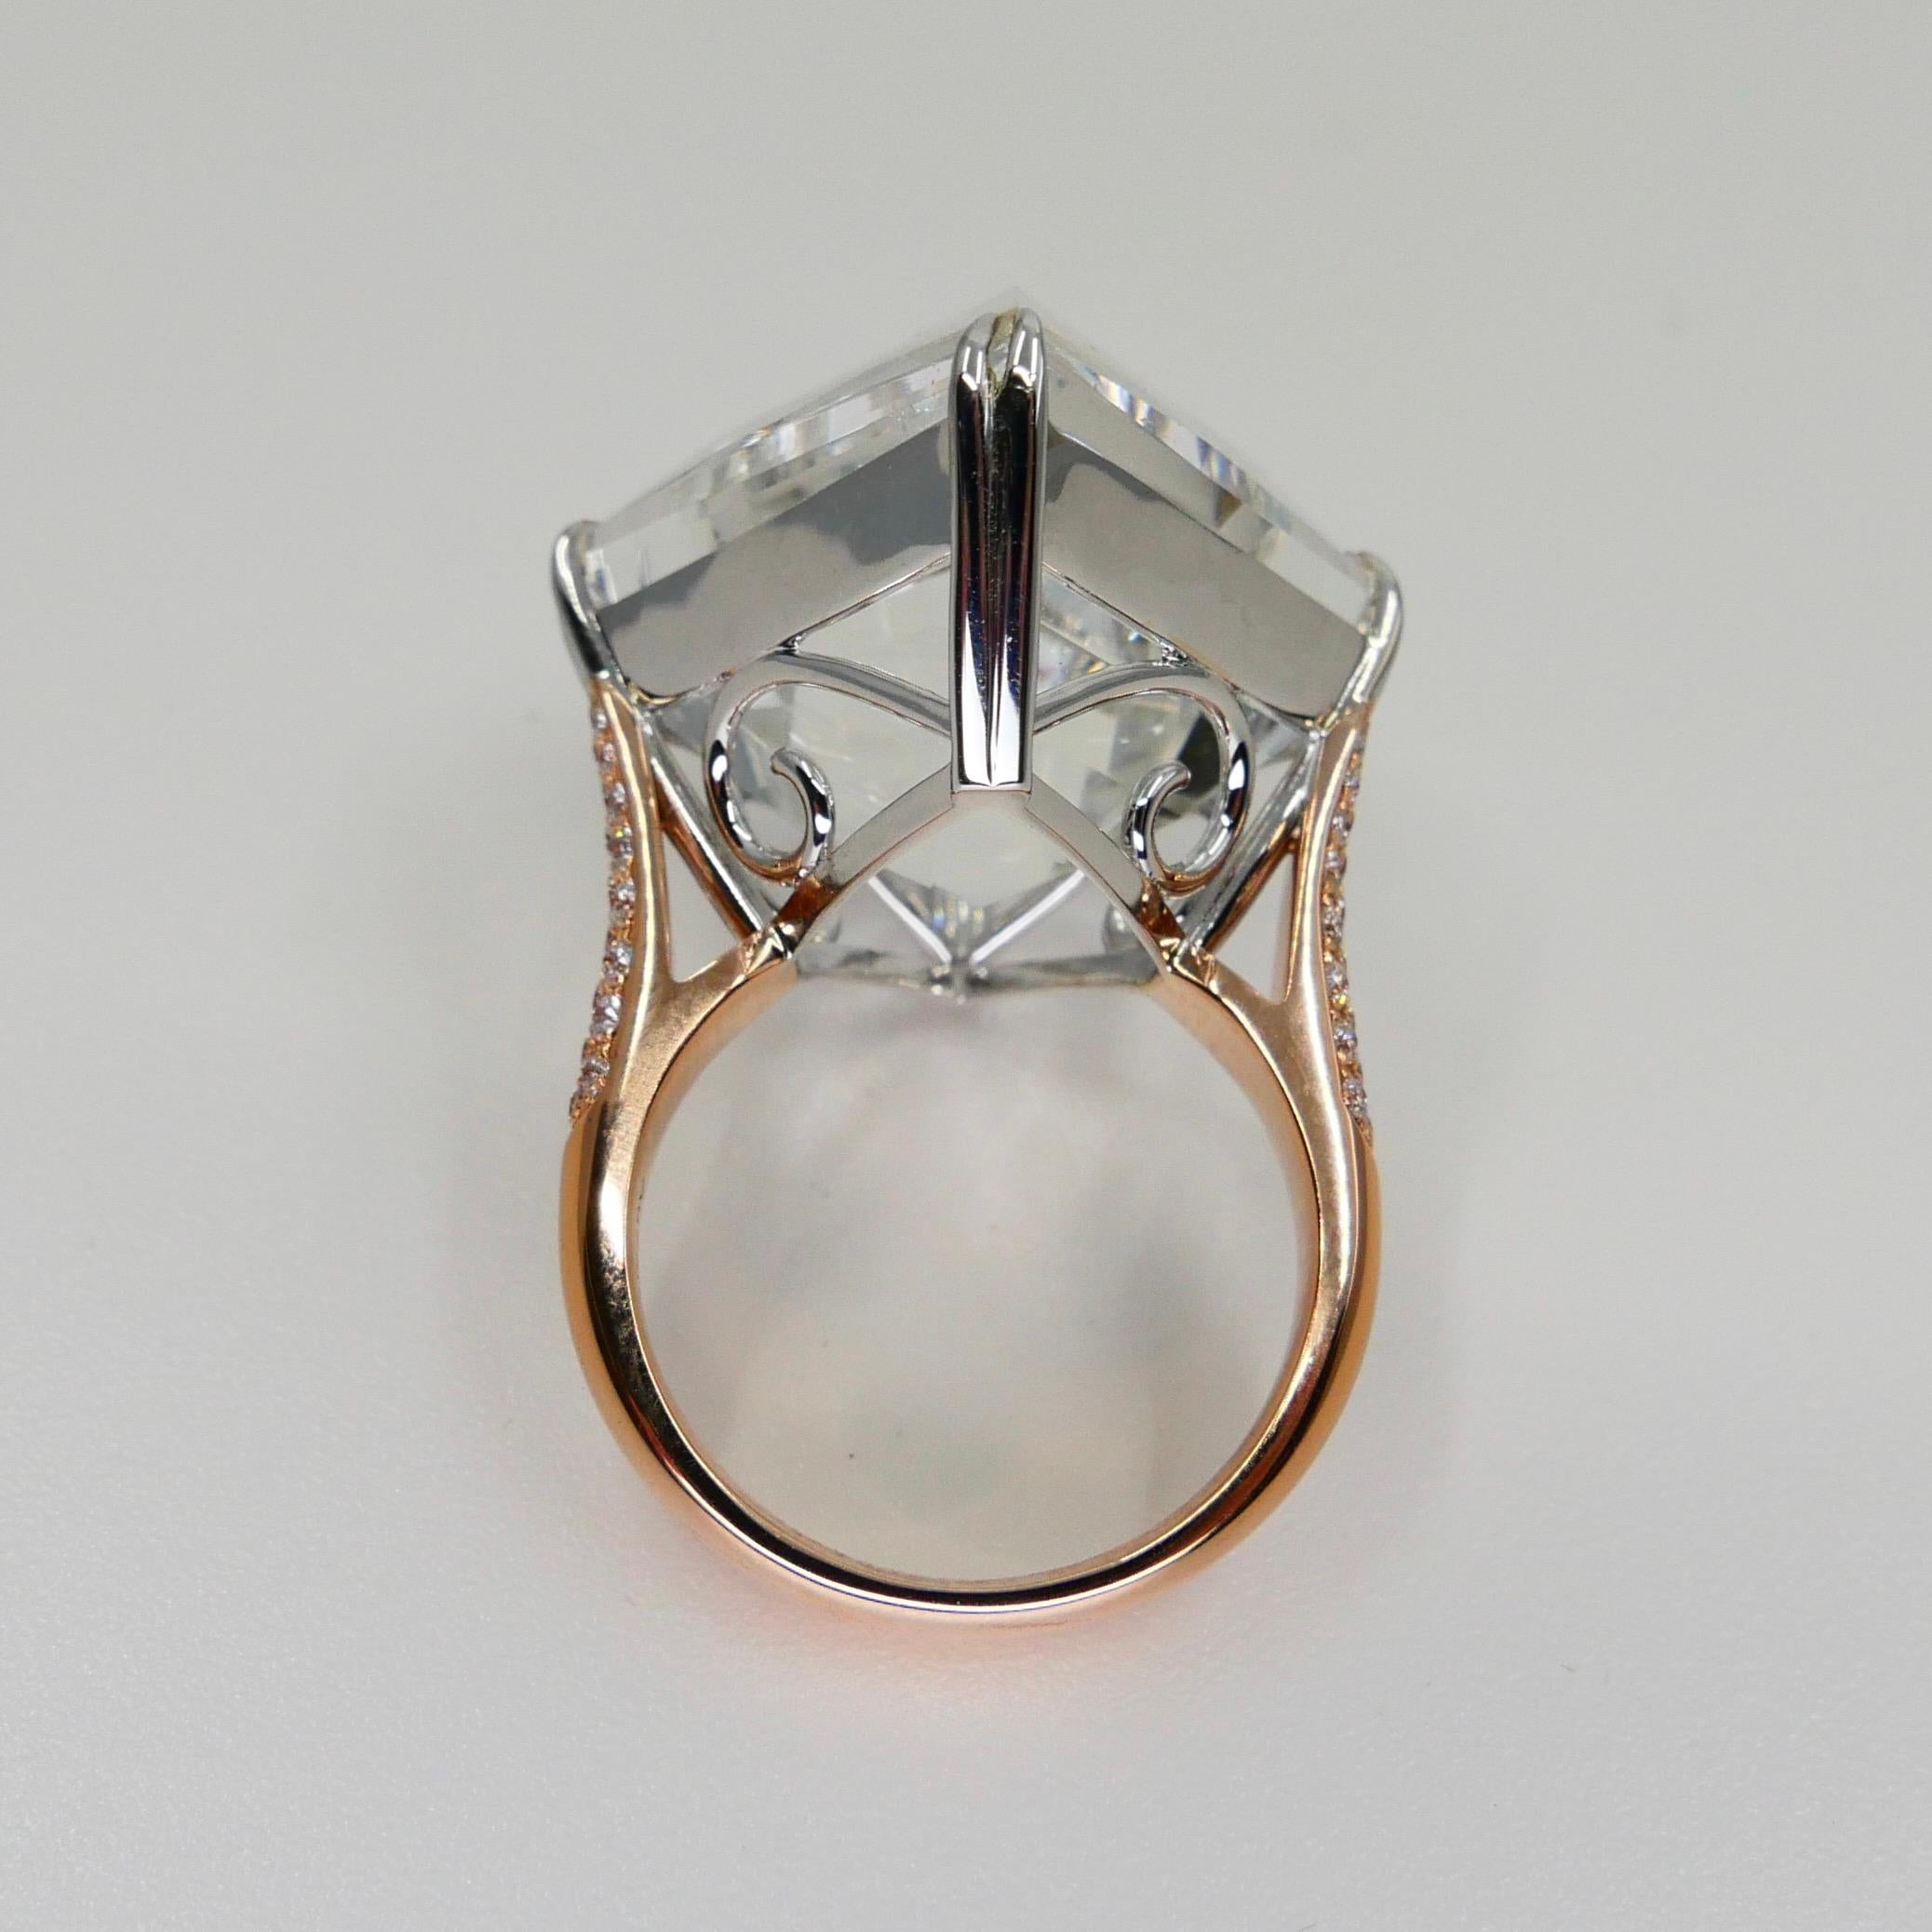 49.02 Carat Kite Step Cut White Topaz and Diamond Cocktail Ring, Massive For Sale 8